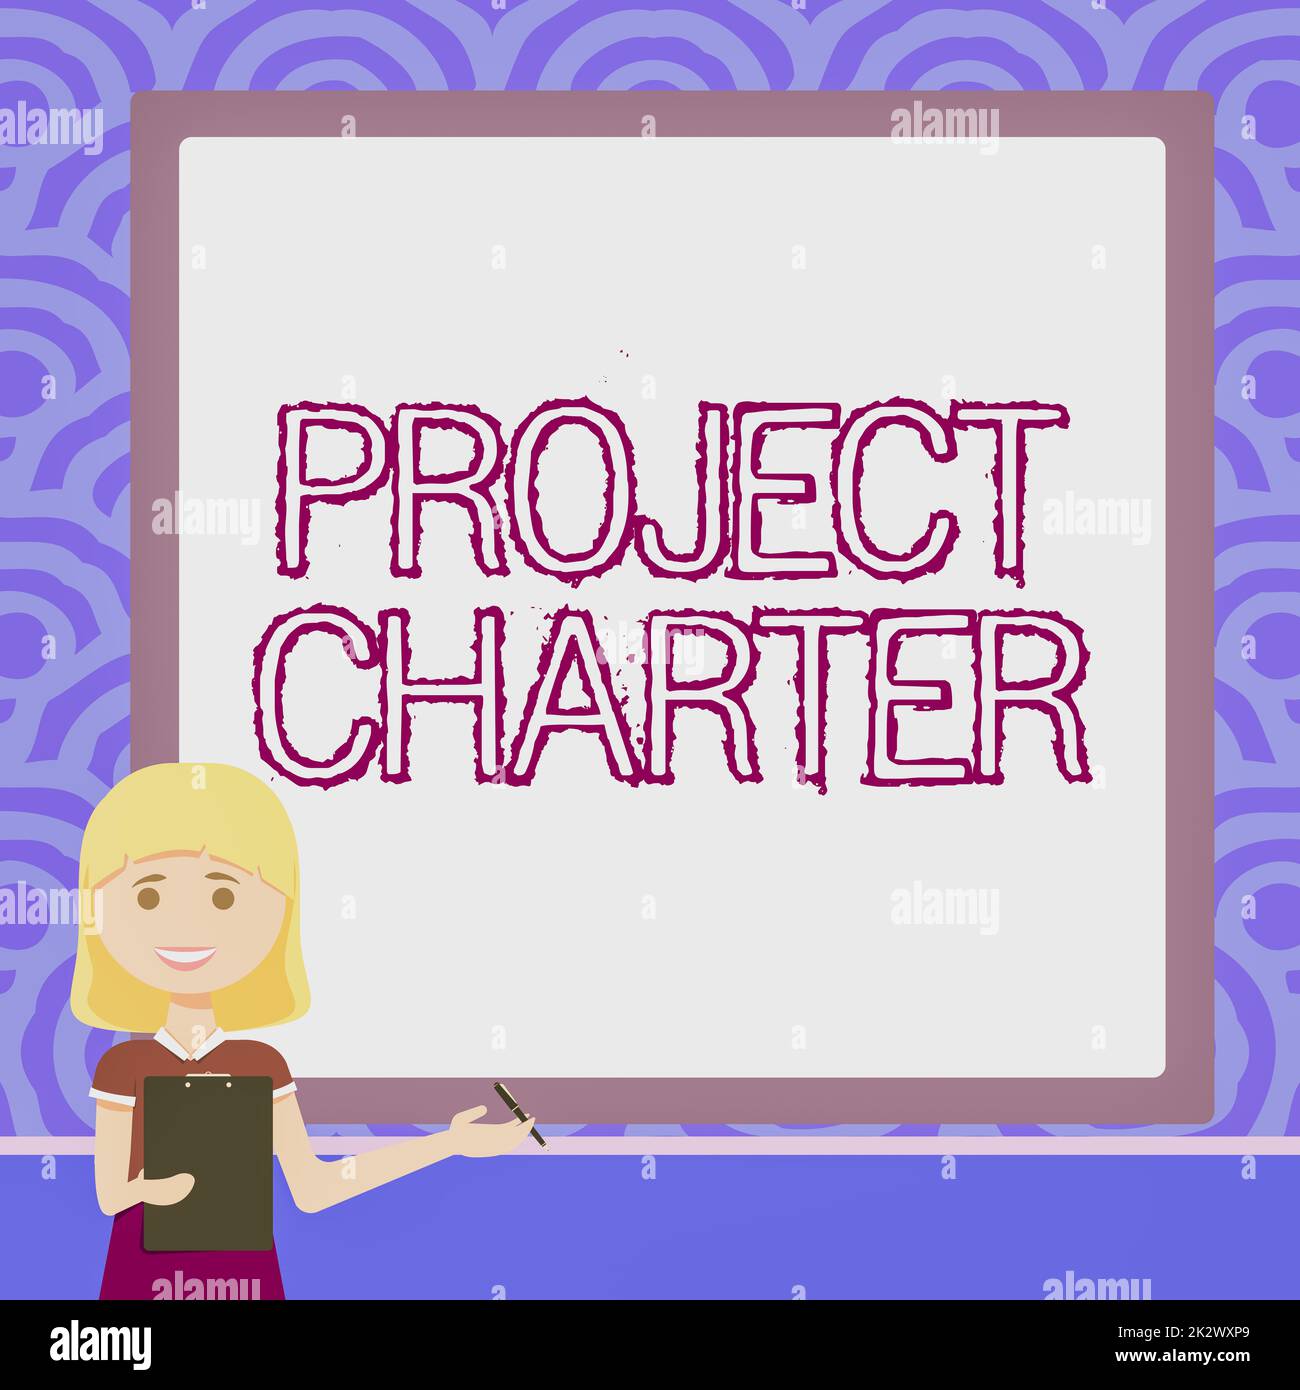 https://c8.alamy.com/comp/2K2WXP9/sign-displaying-project-charter-business-overview-typically-short-formal-document-that-describes-your-project-lady-drawing-standing-holding-clipboard-presenting-new-ideas-to-team-2K2WXP9.jpg